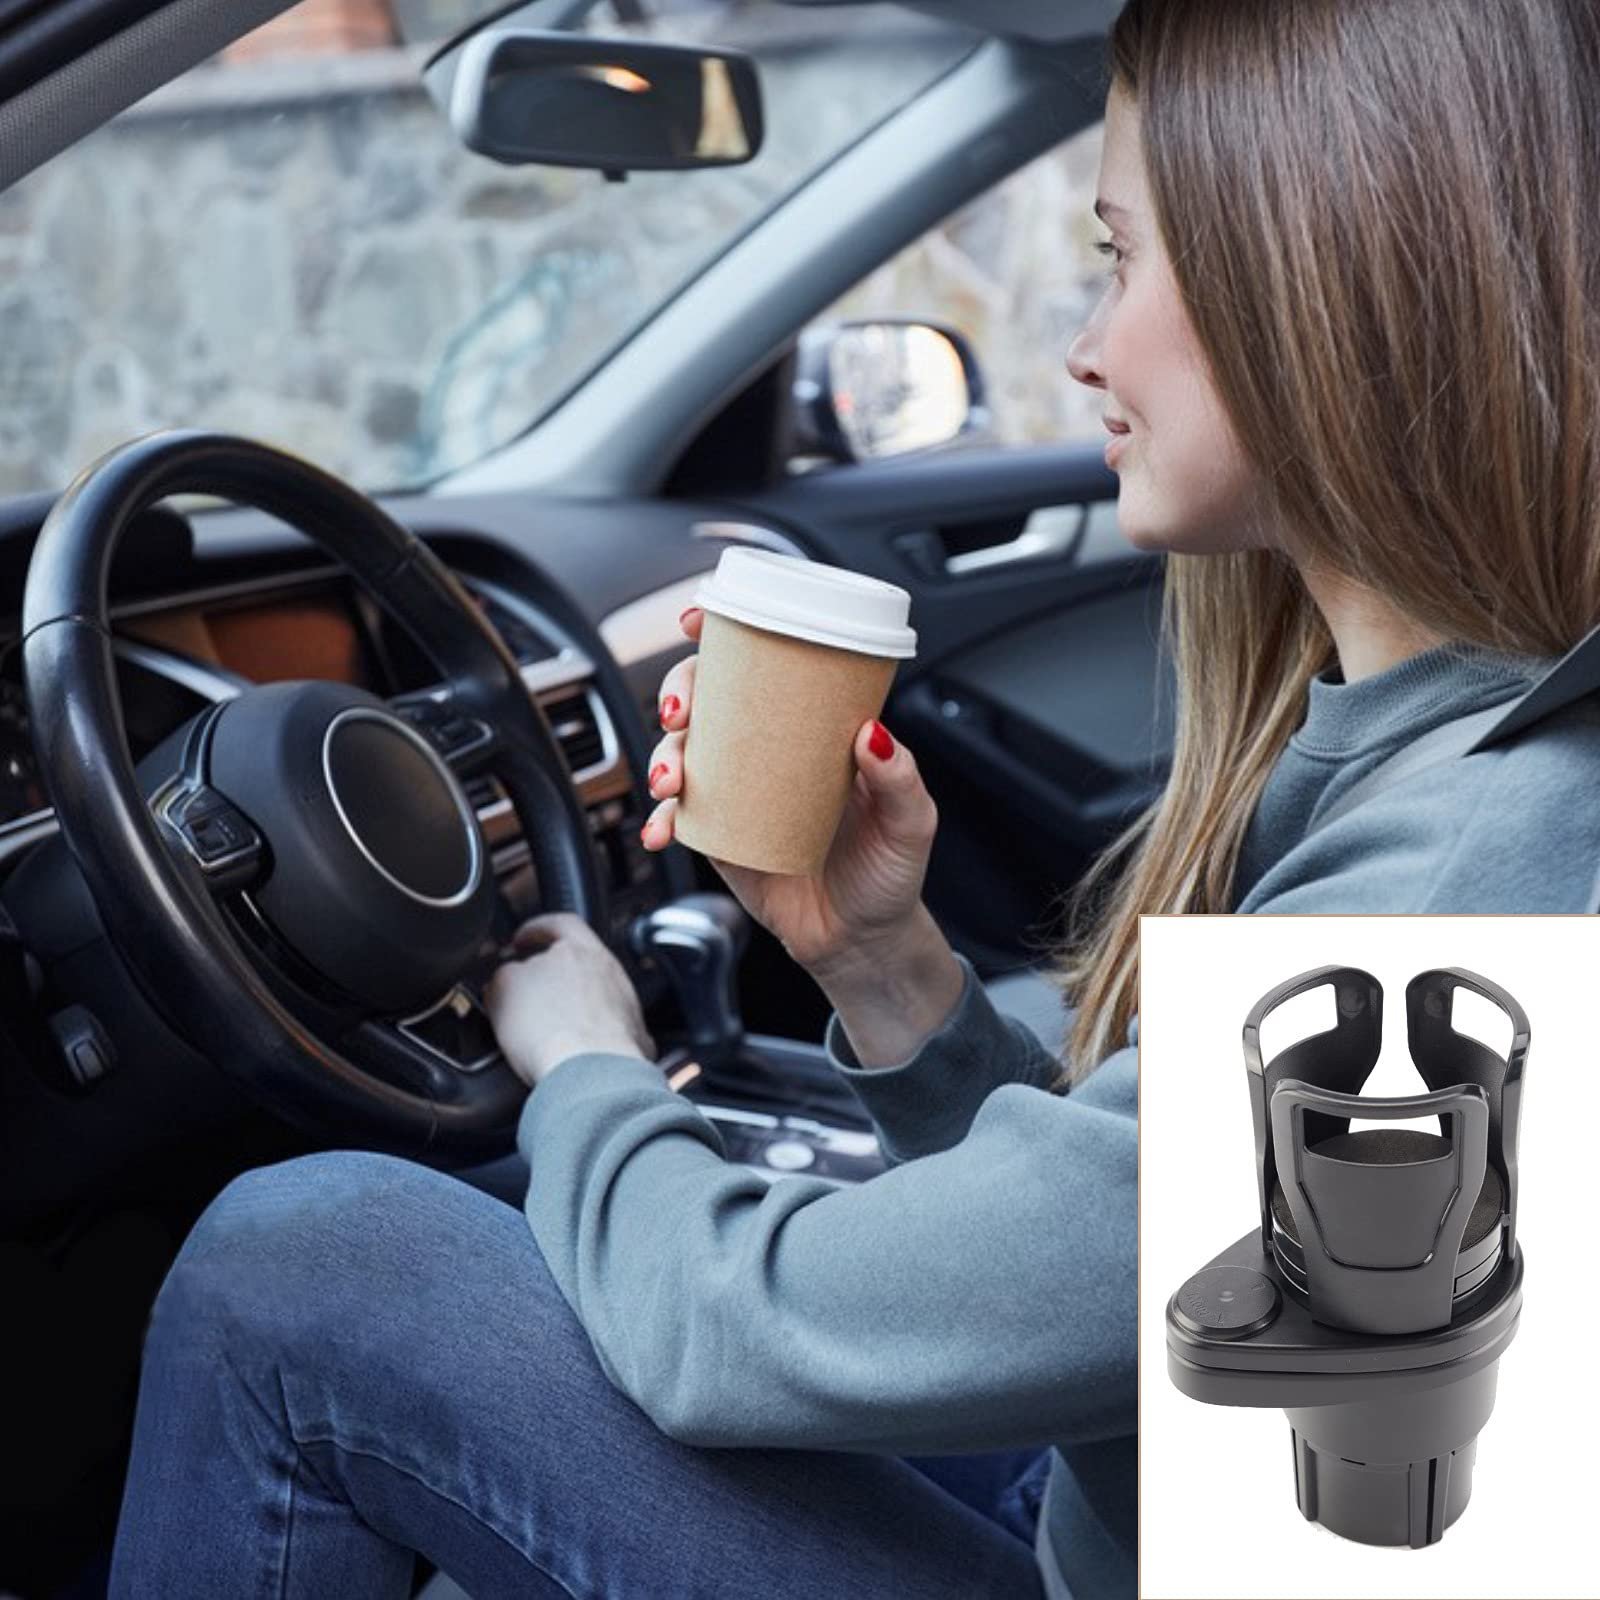 🎁Early Christmas Sales 49% OFF- All Purpose Car Cup Holder